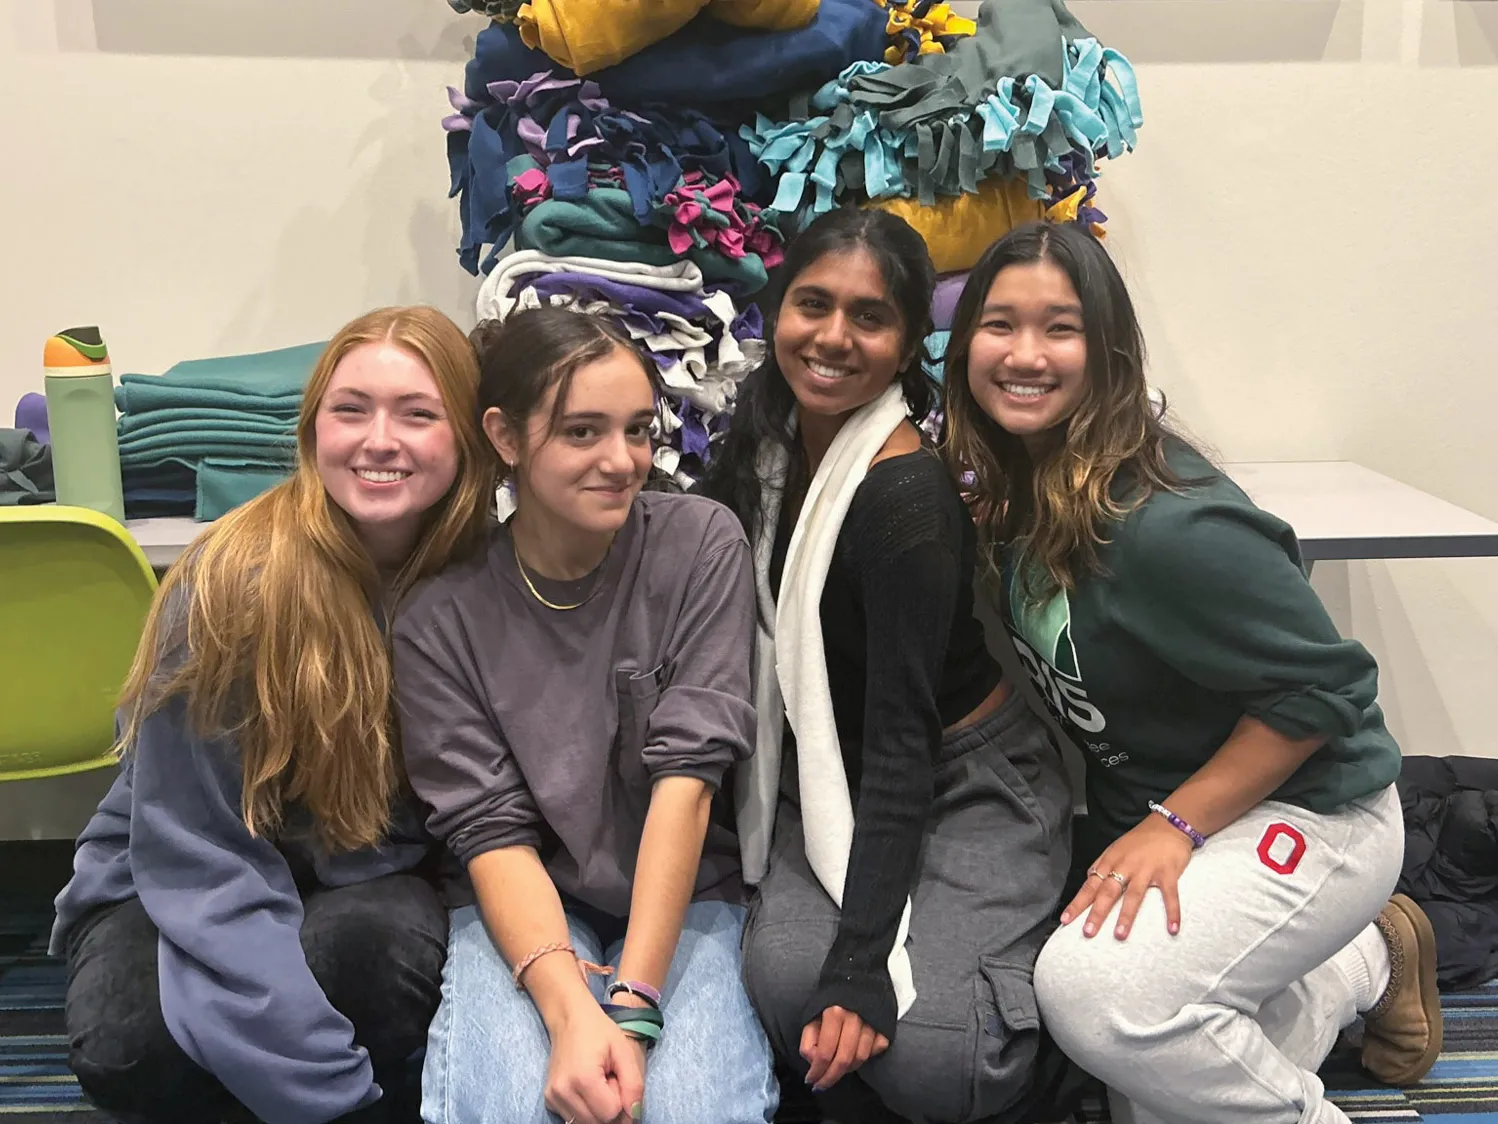 Crouching to pose in front of a table stacked high with fleece blankets are four female students smiling widely. The way they scooted close together speaks to the friends being very comfortable with one another. The blankets are double layered with wide fringe hand-knotted along each side.